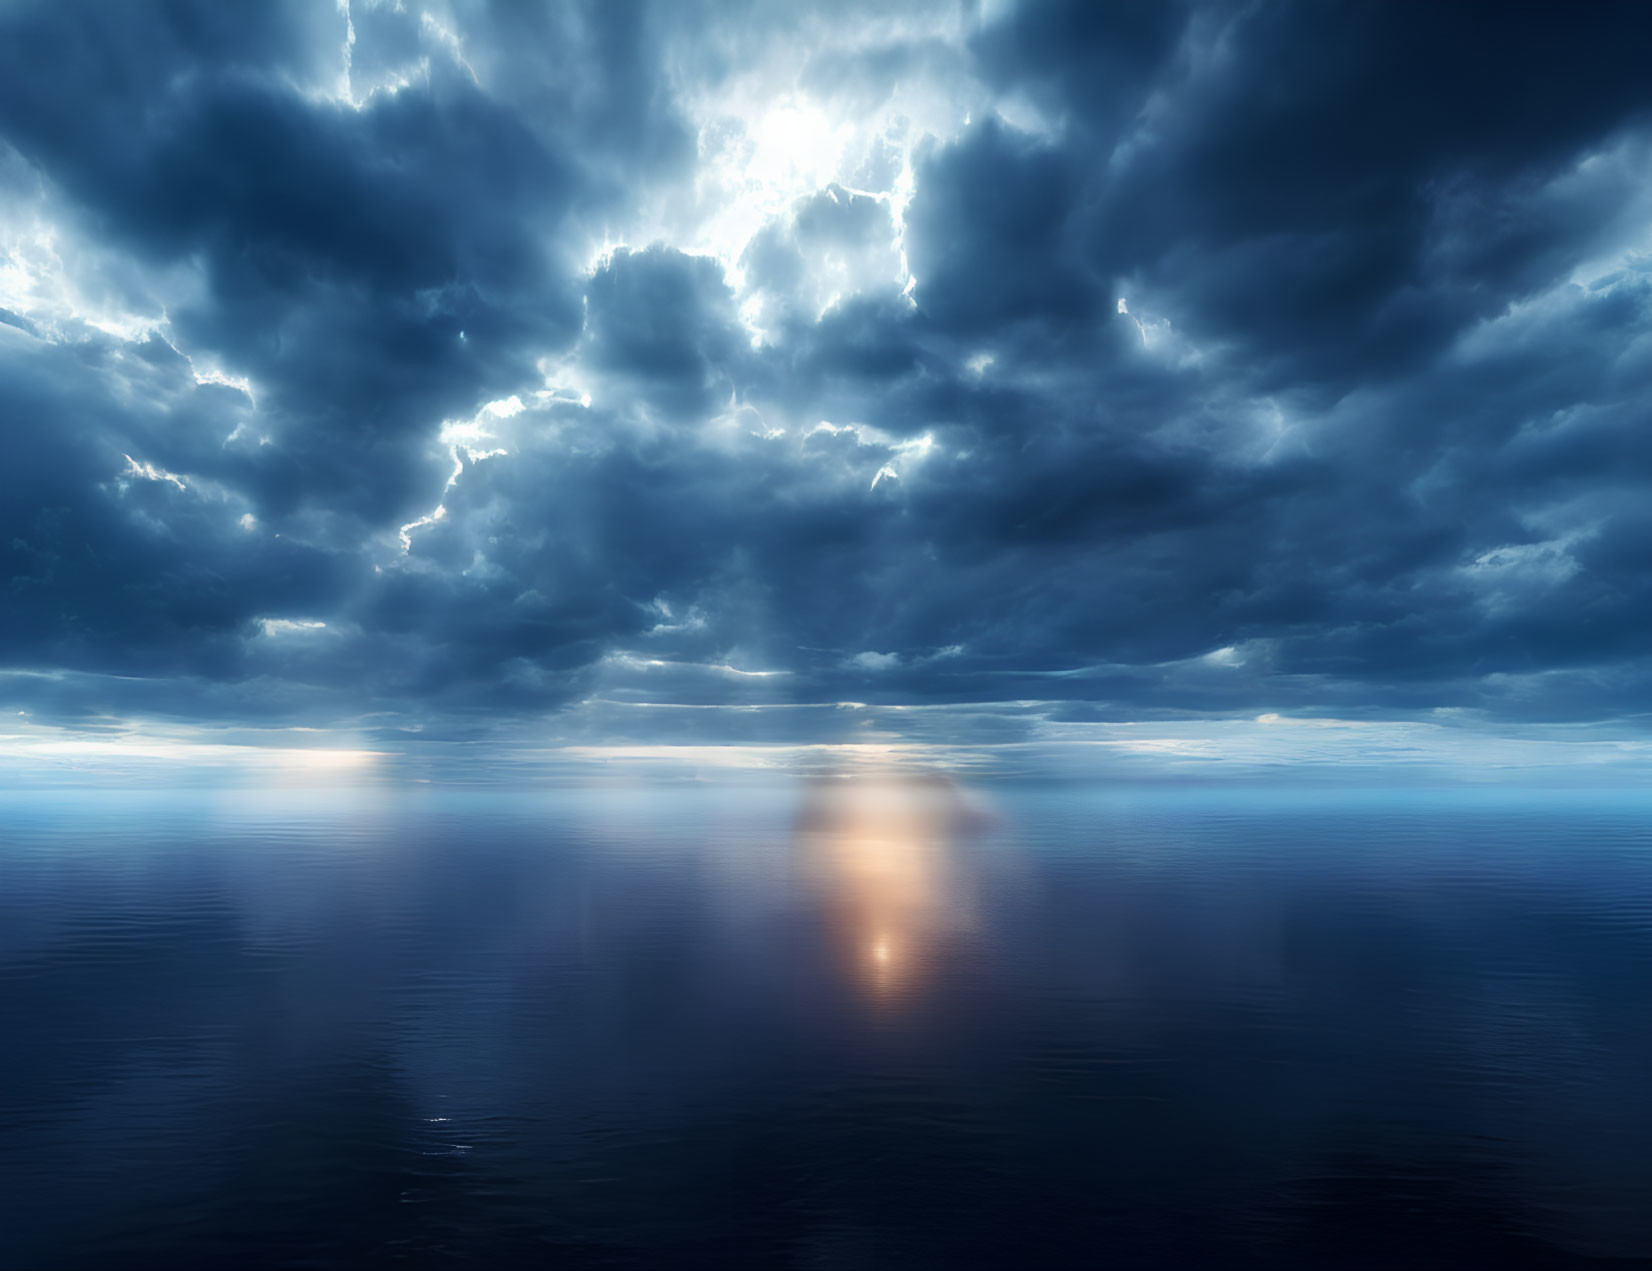 Dramatic seascape with dark clouds and sunlight reflection